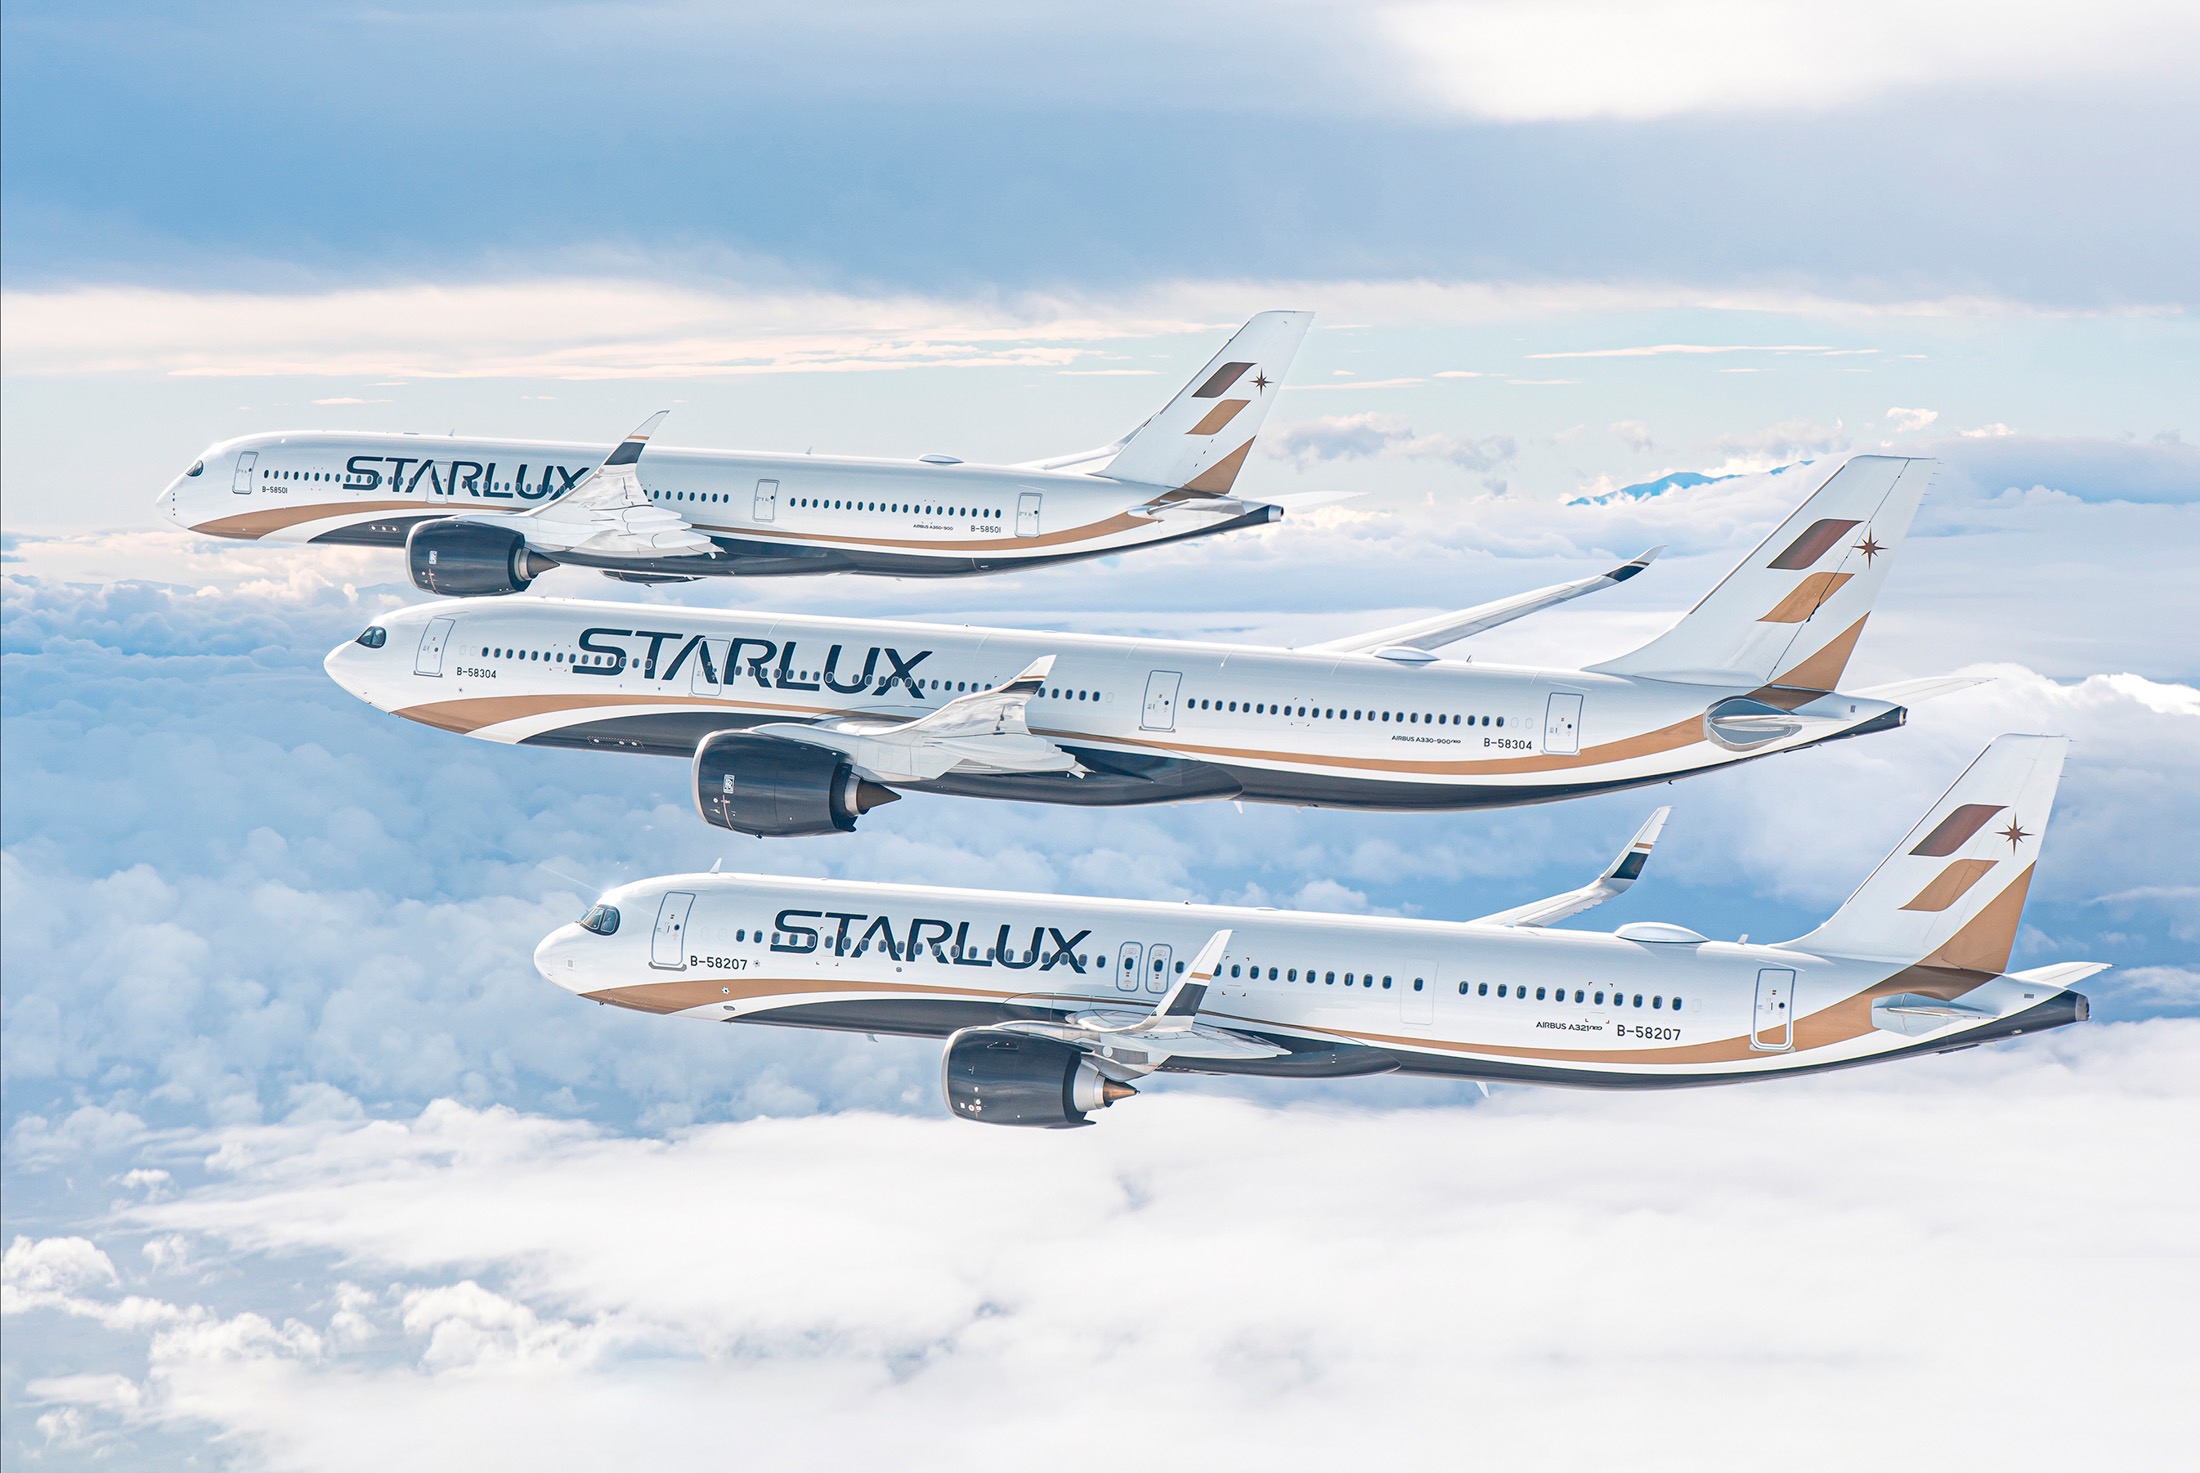 three Starlux airlines flying in the sky